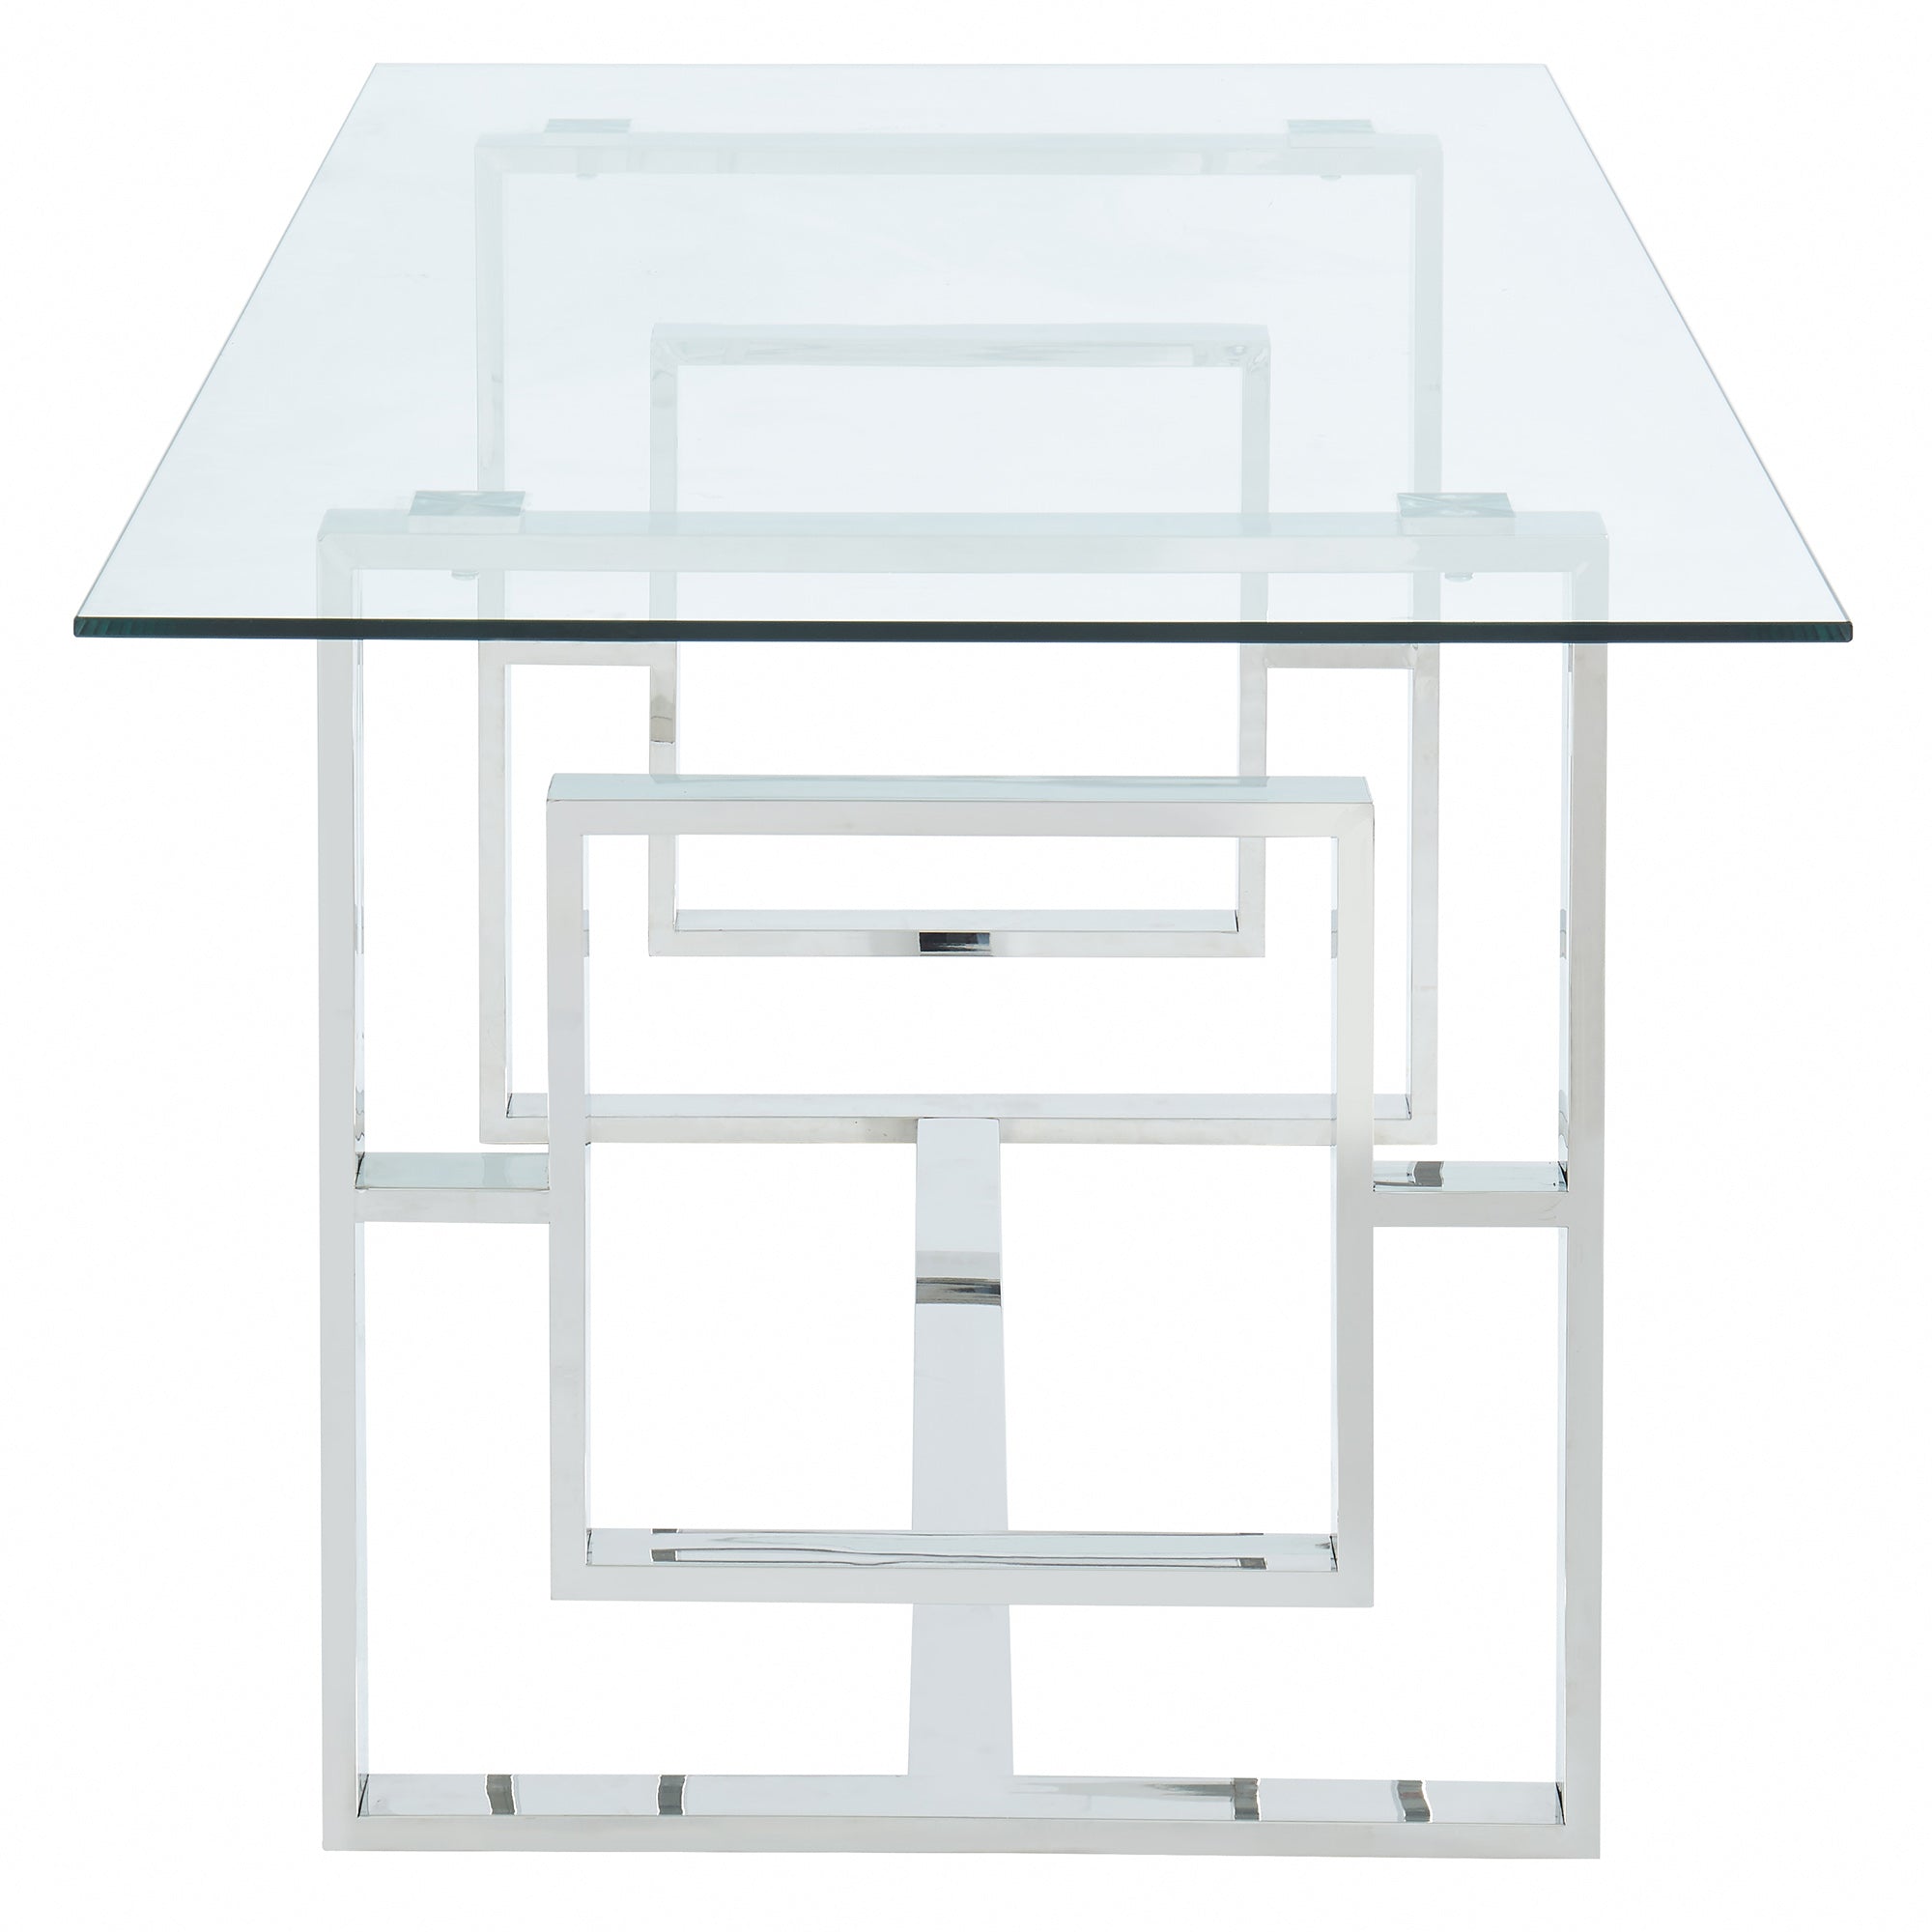 Eros Rectangular Dining Table in Silver